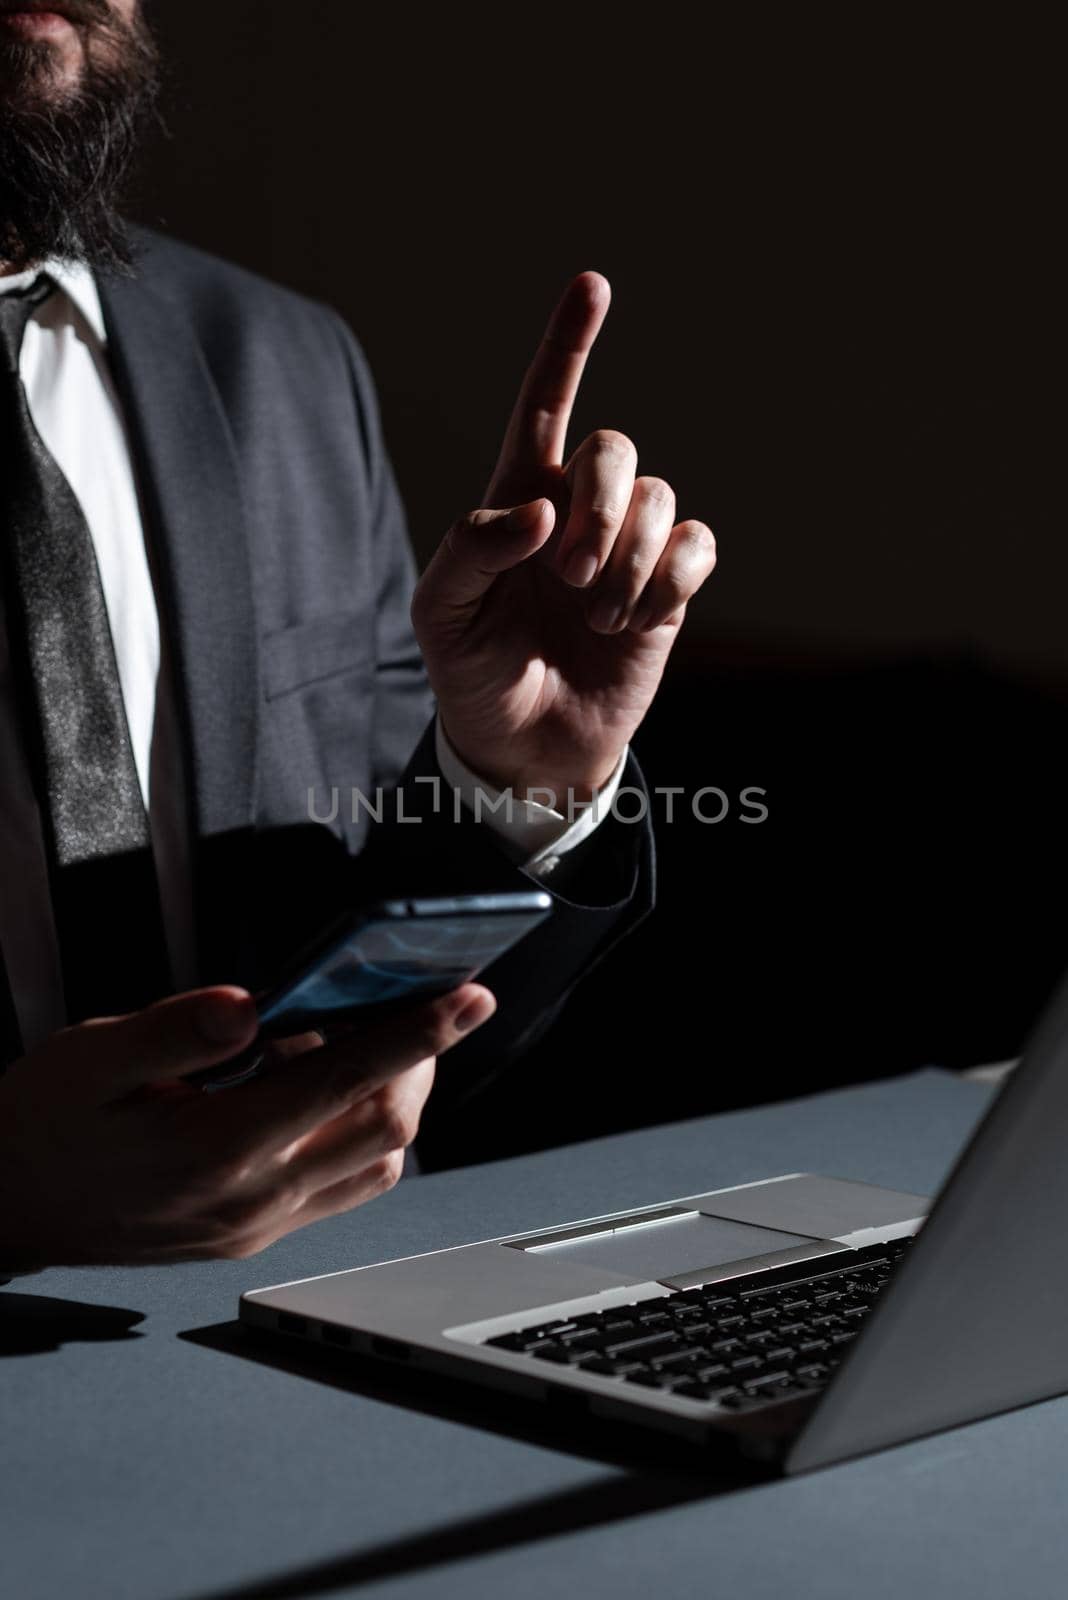 Businessman Holding Mobile Phone In Hand And Pointing With One Finger On Important Message On Desk With Lap Top. Man Having Cellphone And Presenting New Ideas With One Hand. by nialowwa